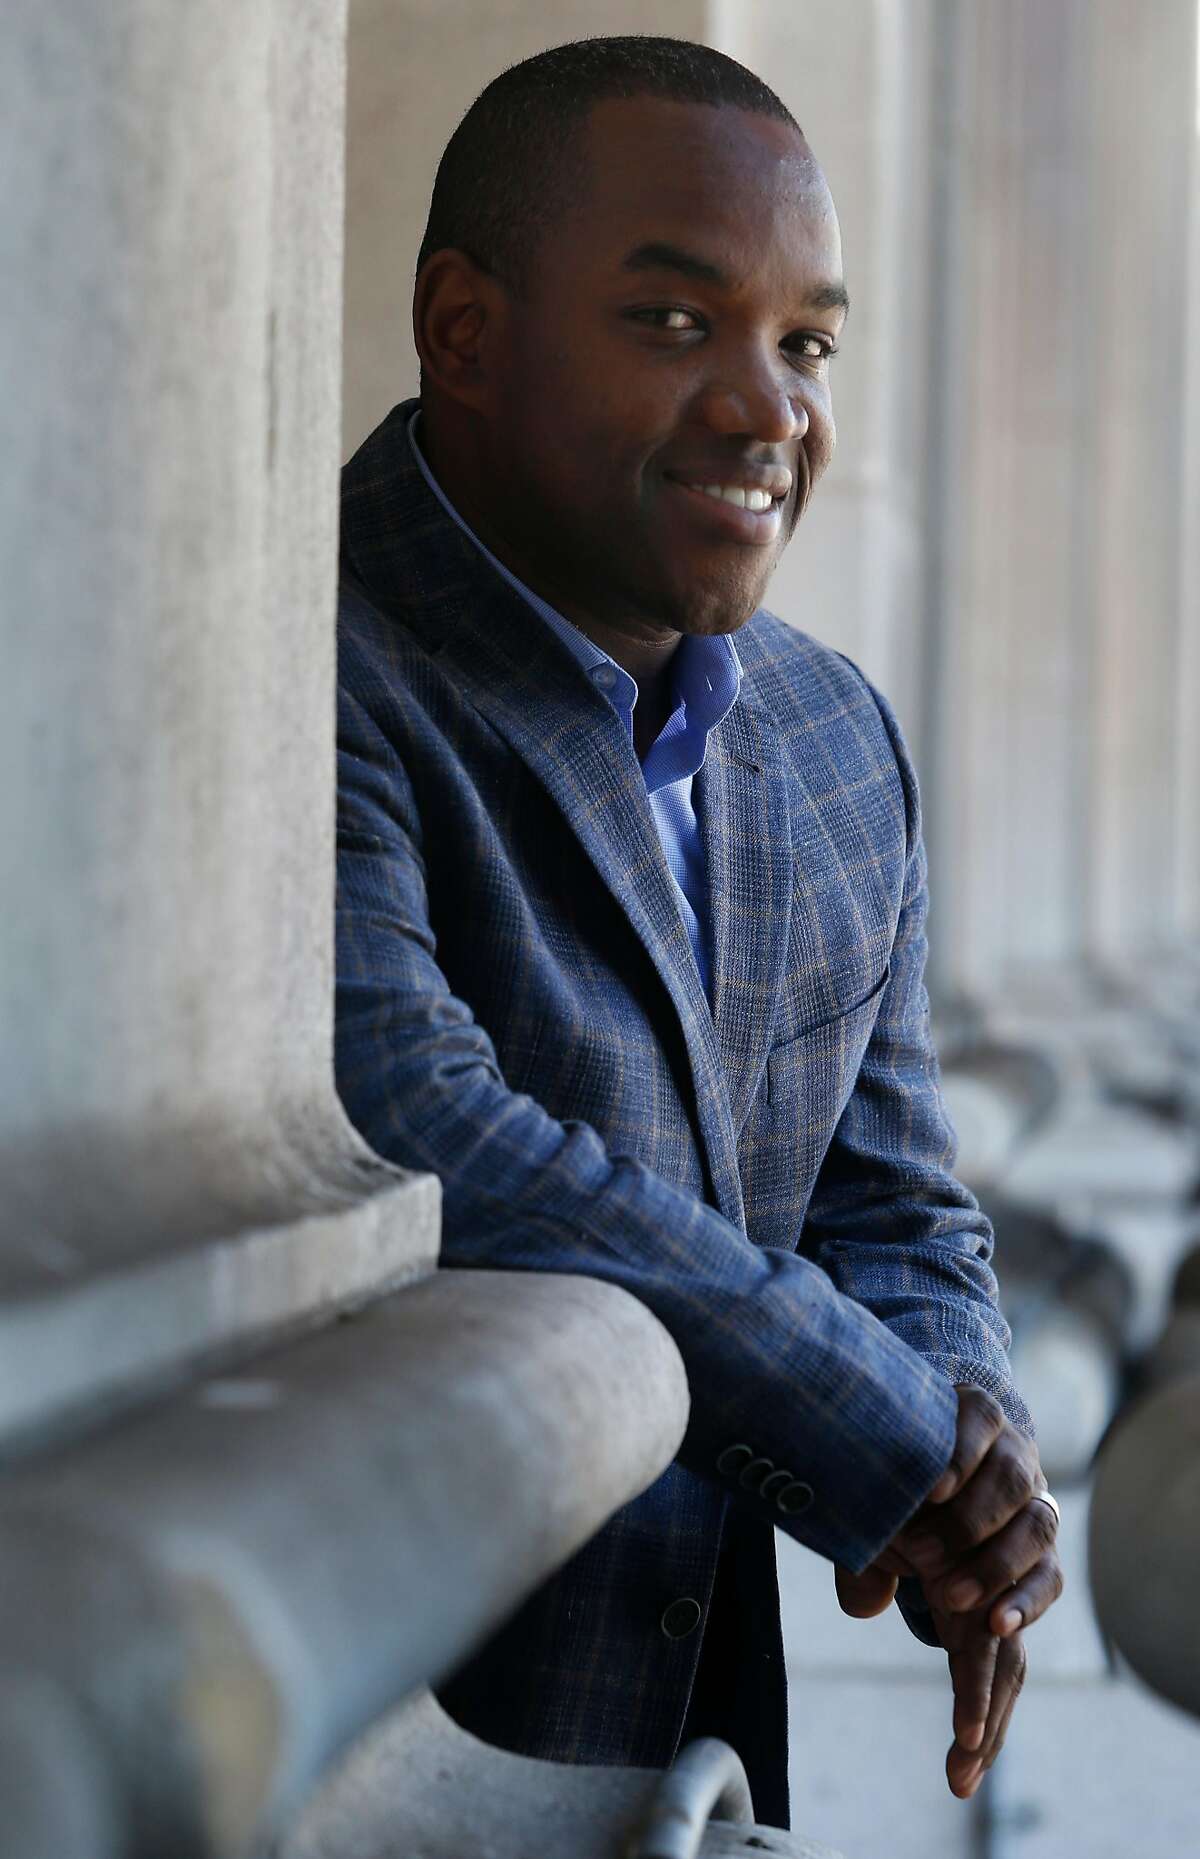 Operatic tenor Lawrence Brownlee visits the War Memorial Opera House in San Francisco, Calif. on Thursday, Sept. 22, 2016. Brownlee is appearing in his debut with the San Francisco Opera in the upcoming production of "Don Pasquale" opening on Sept. 28.